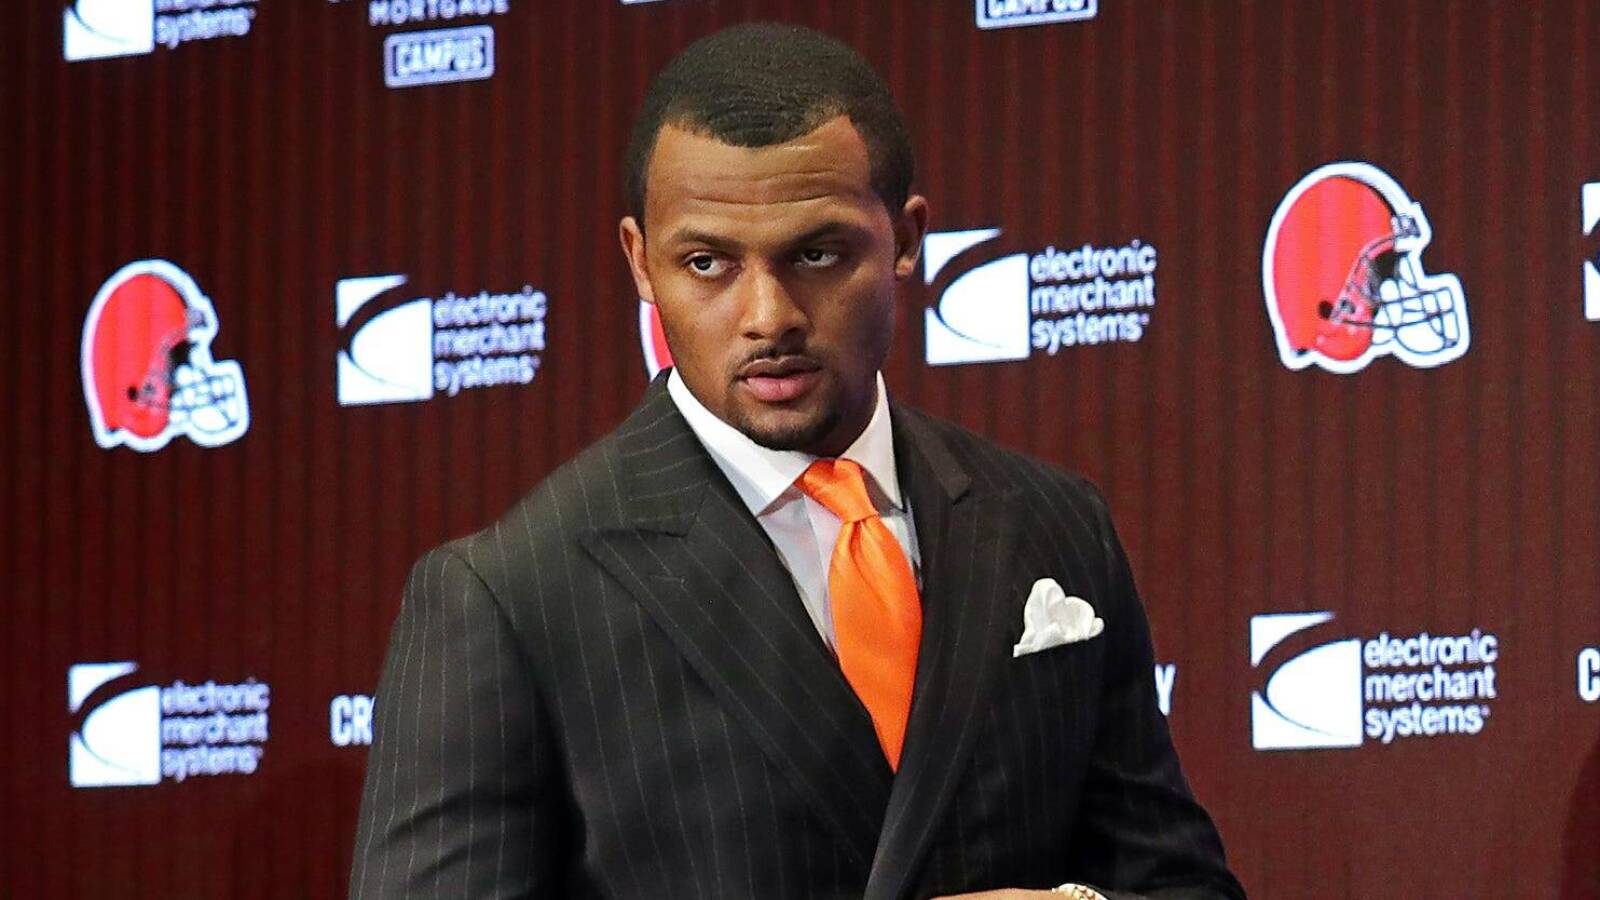 Deshaun Watson's lawyer: Consensual sexual activity during massage 'is not a crime'